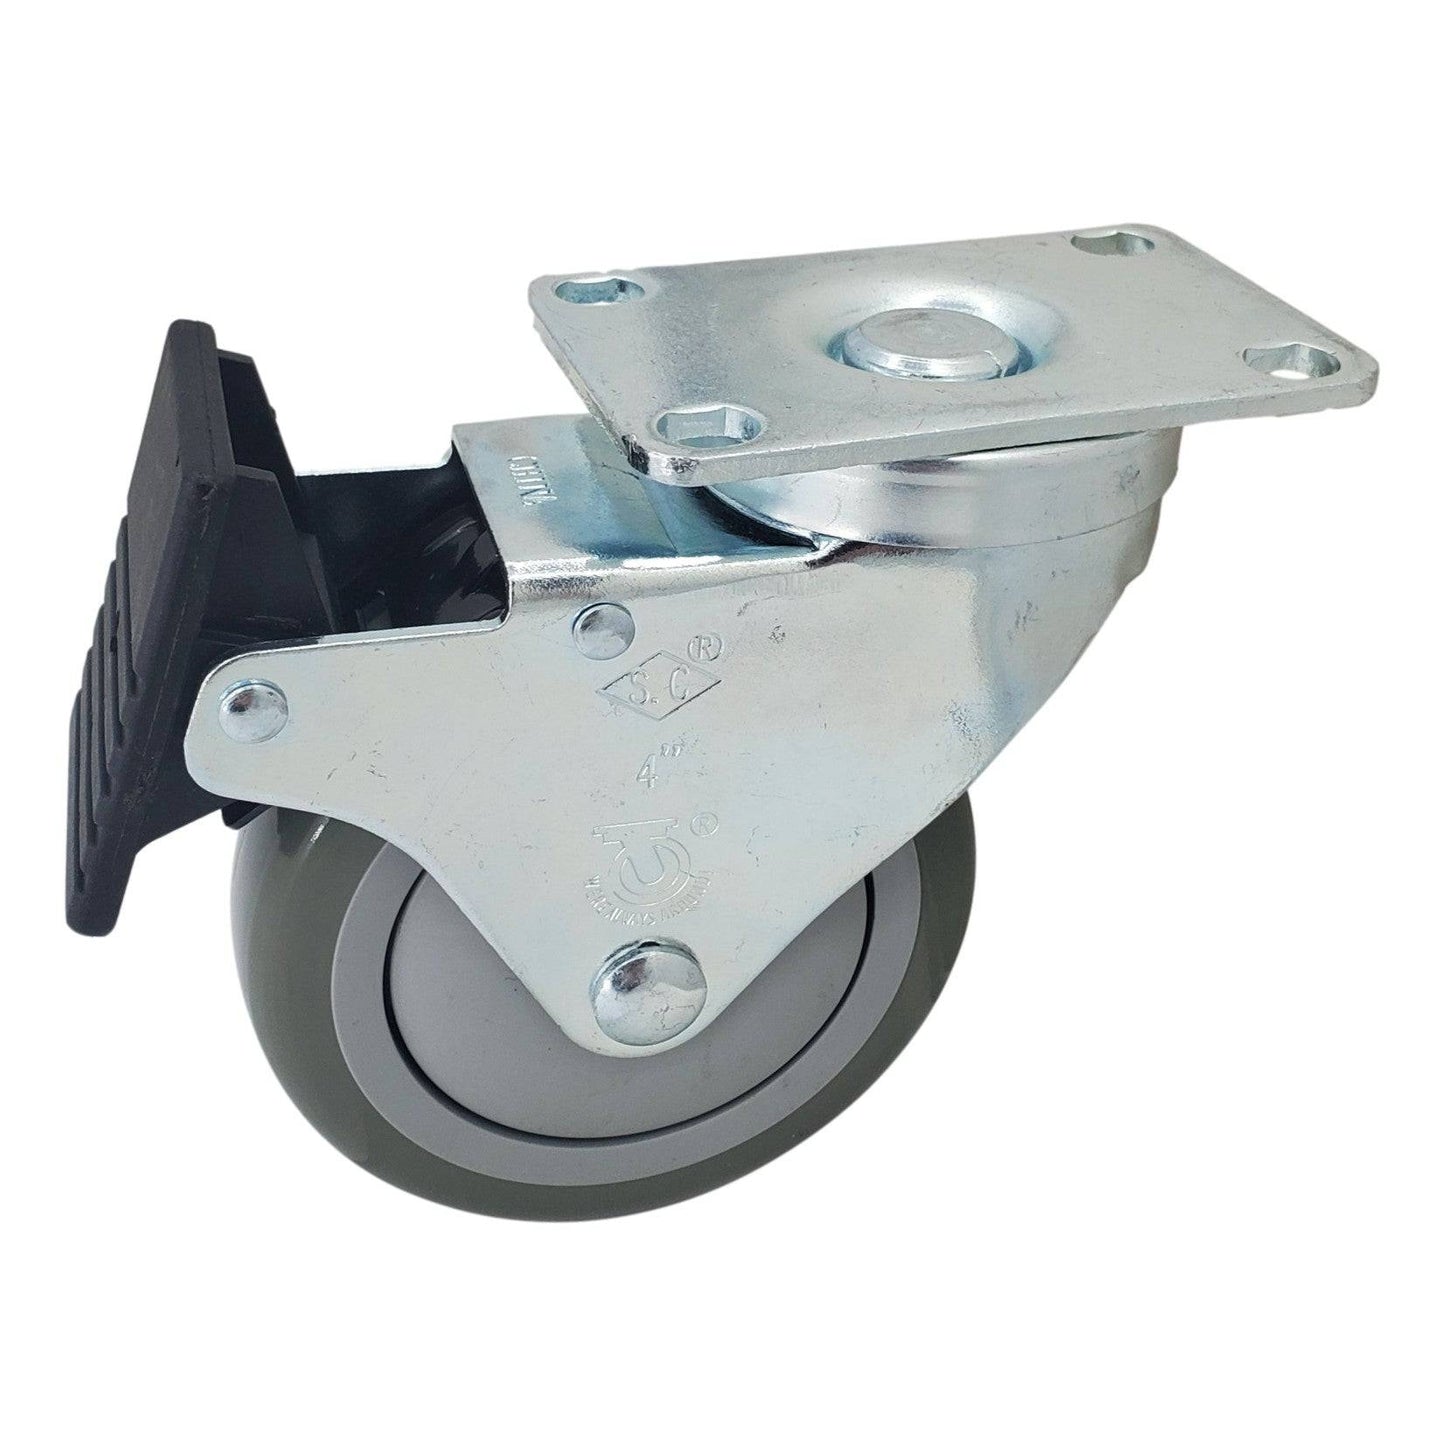 4" x 1-1/4" Poly-Pro Wheel Swivel Caster w/Total Lock Brake- 350 lbs. capacity - Durable Superior Casters